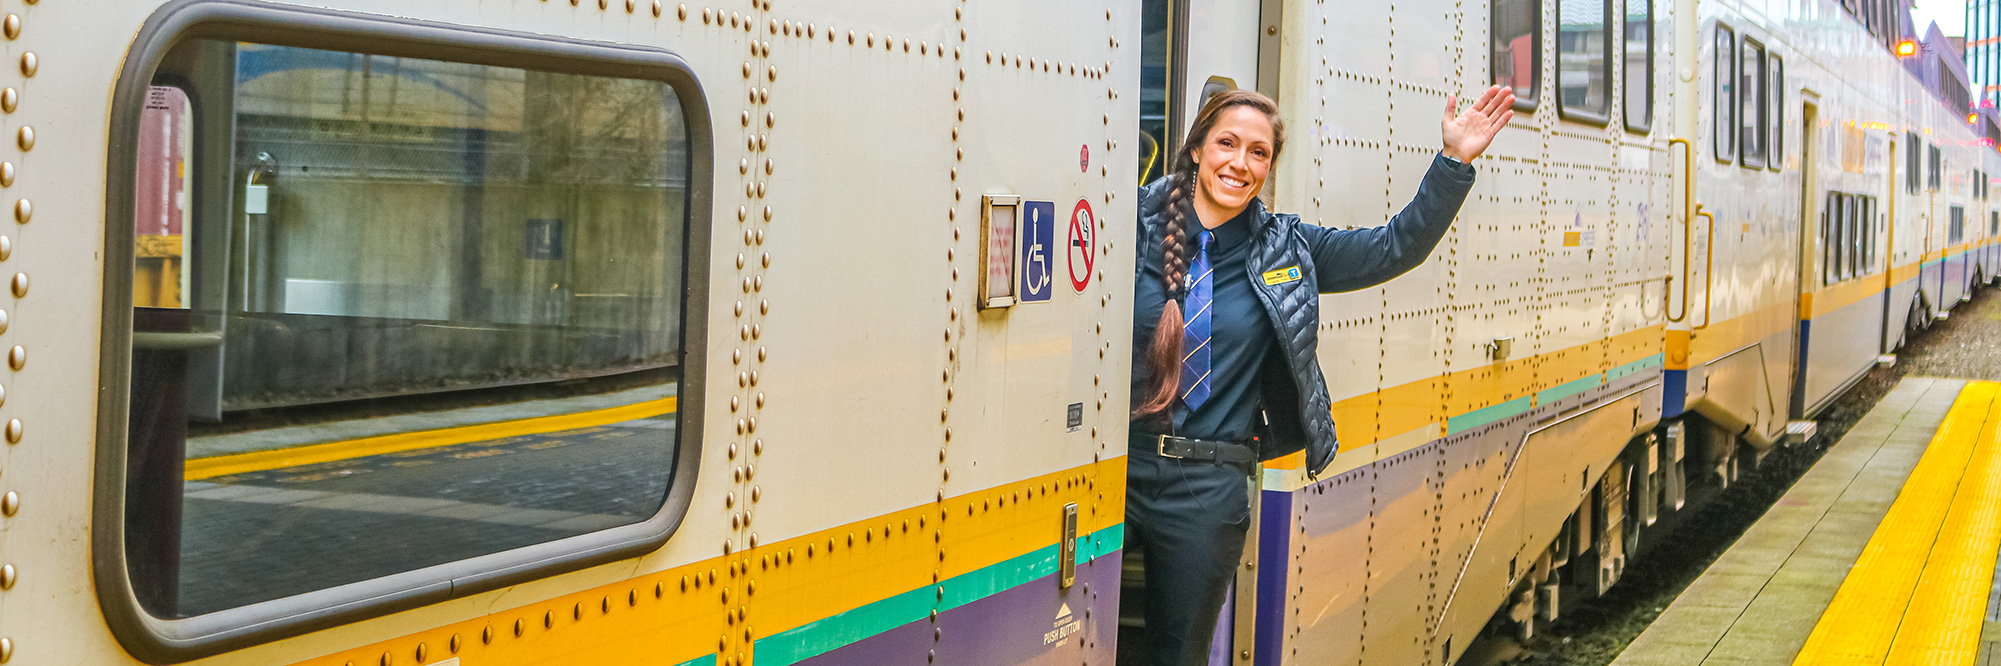 Laura Pineault, a West Coast Express train conductor